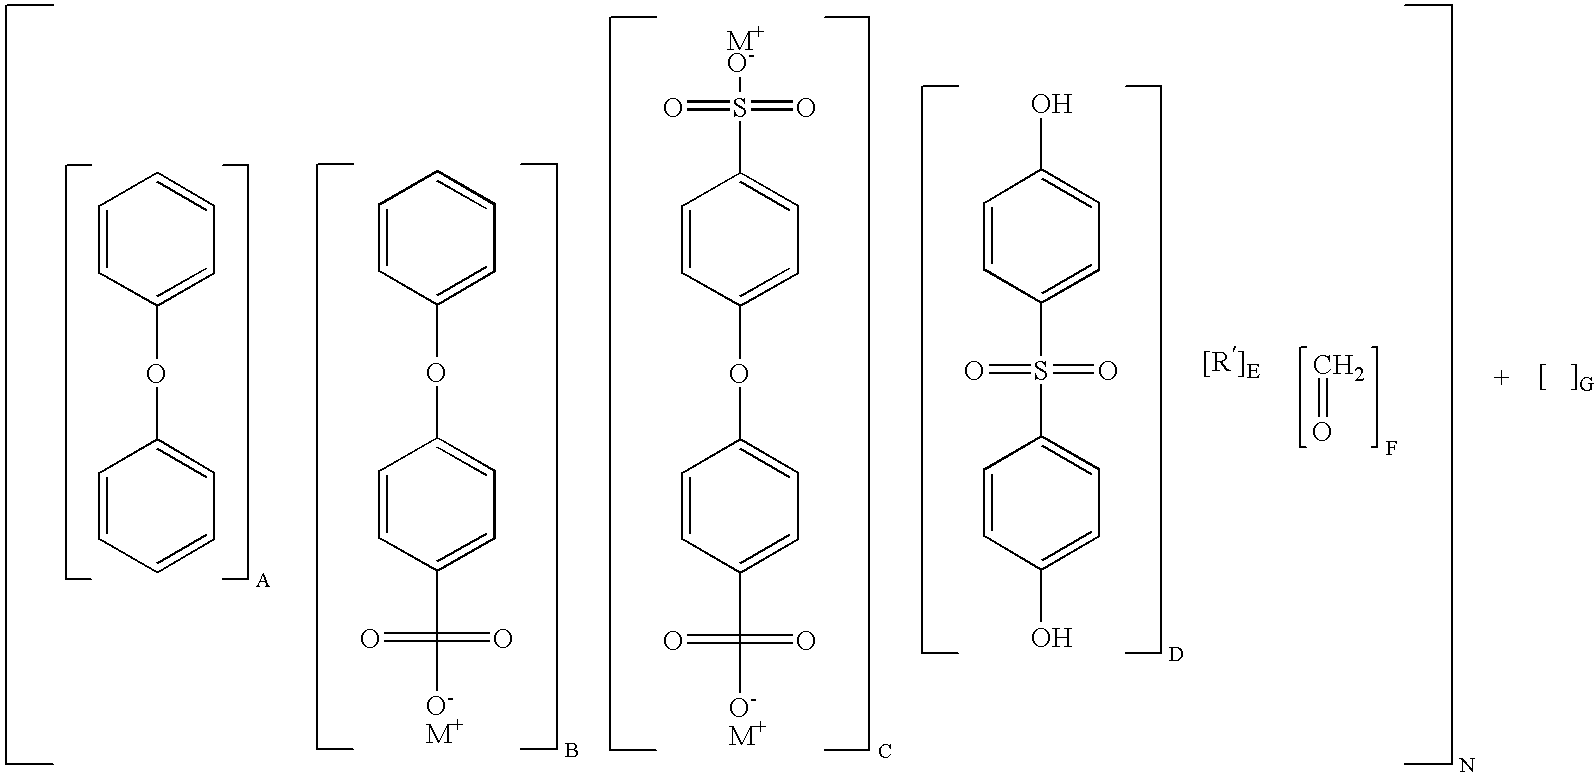 Stainblocker polymers